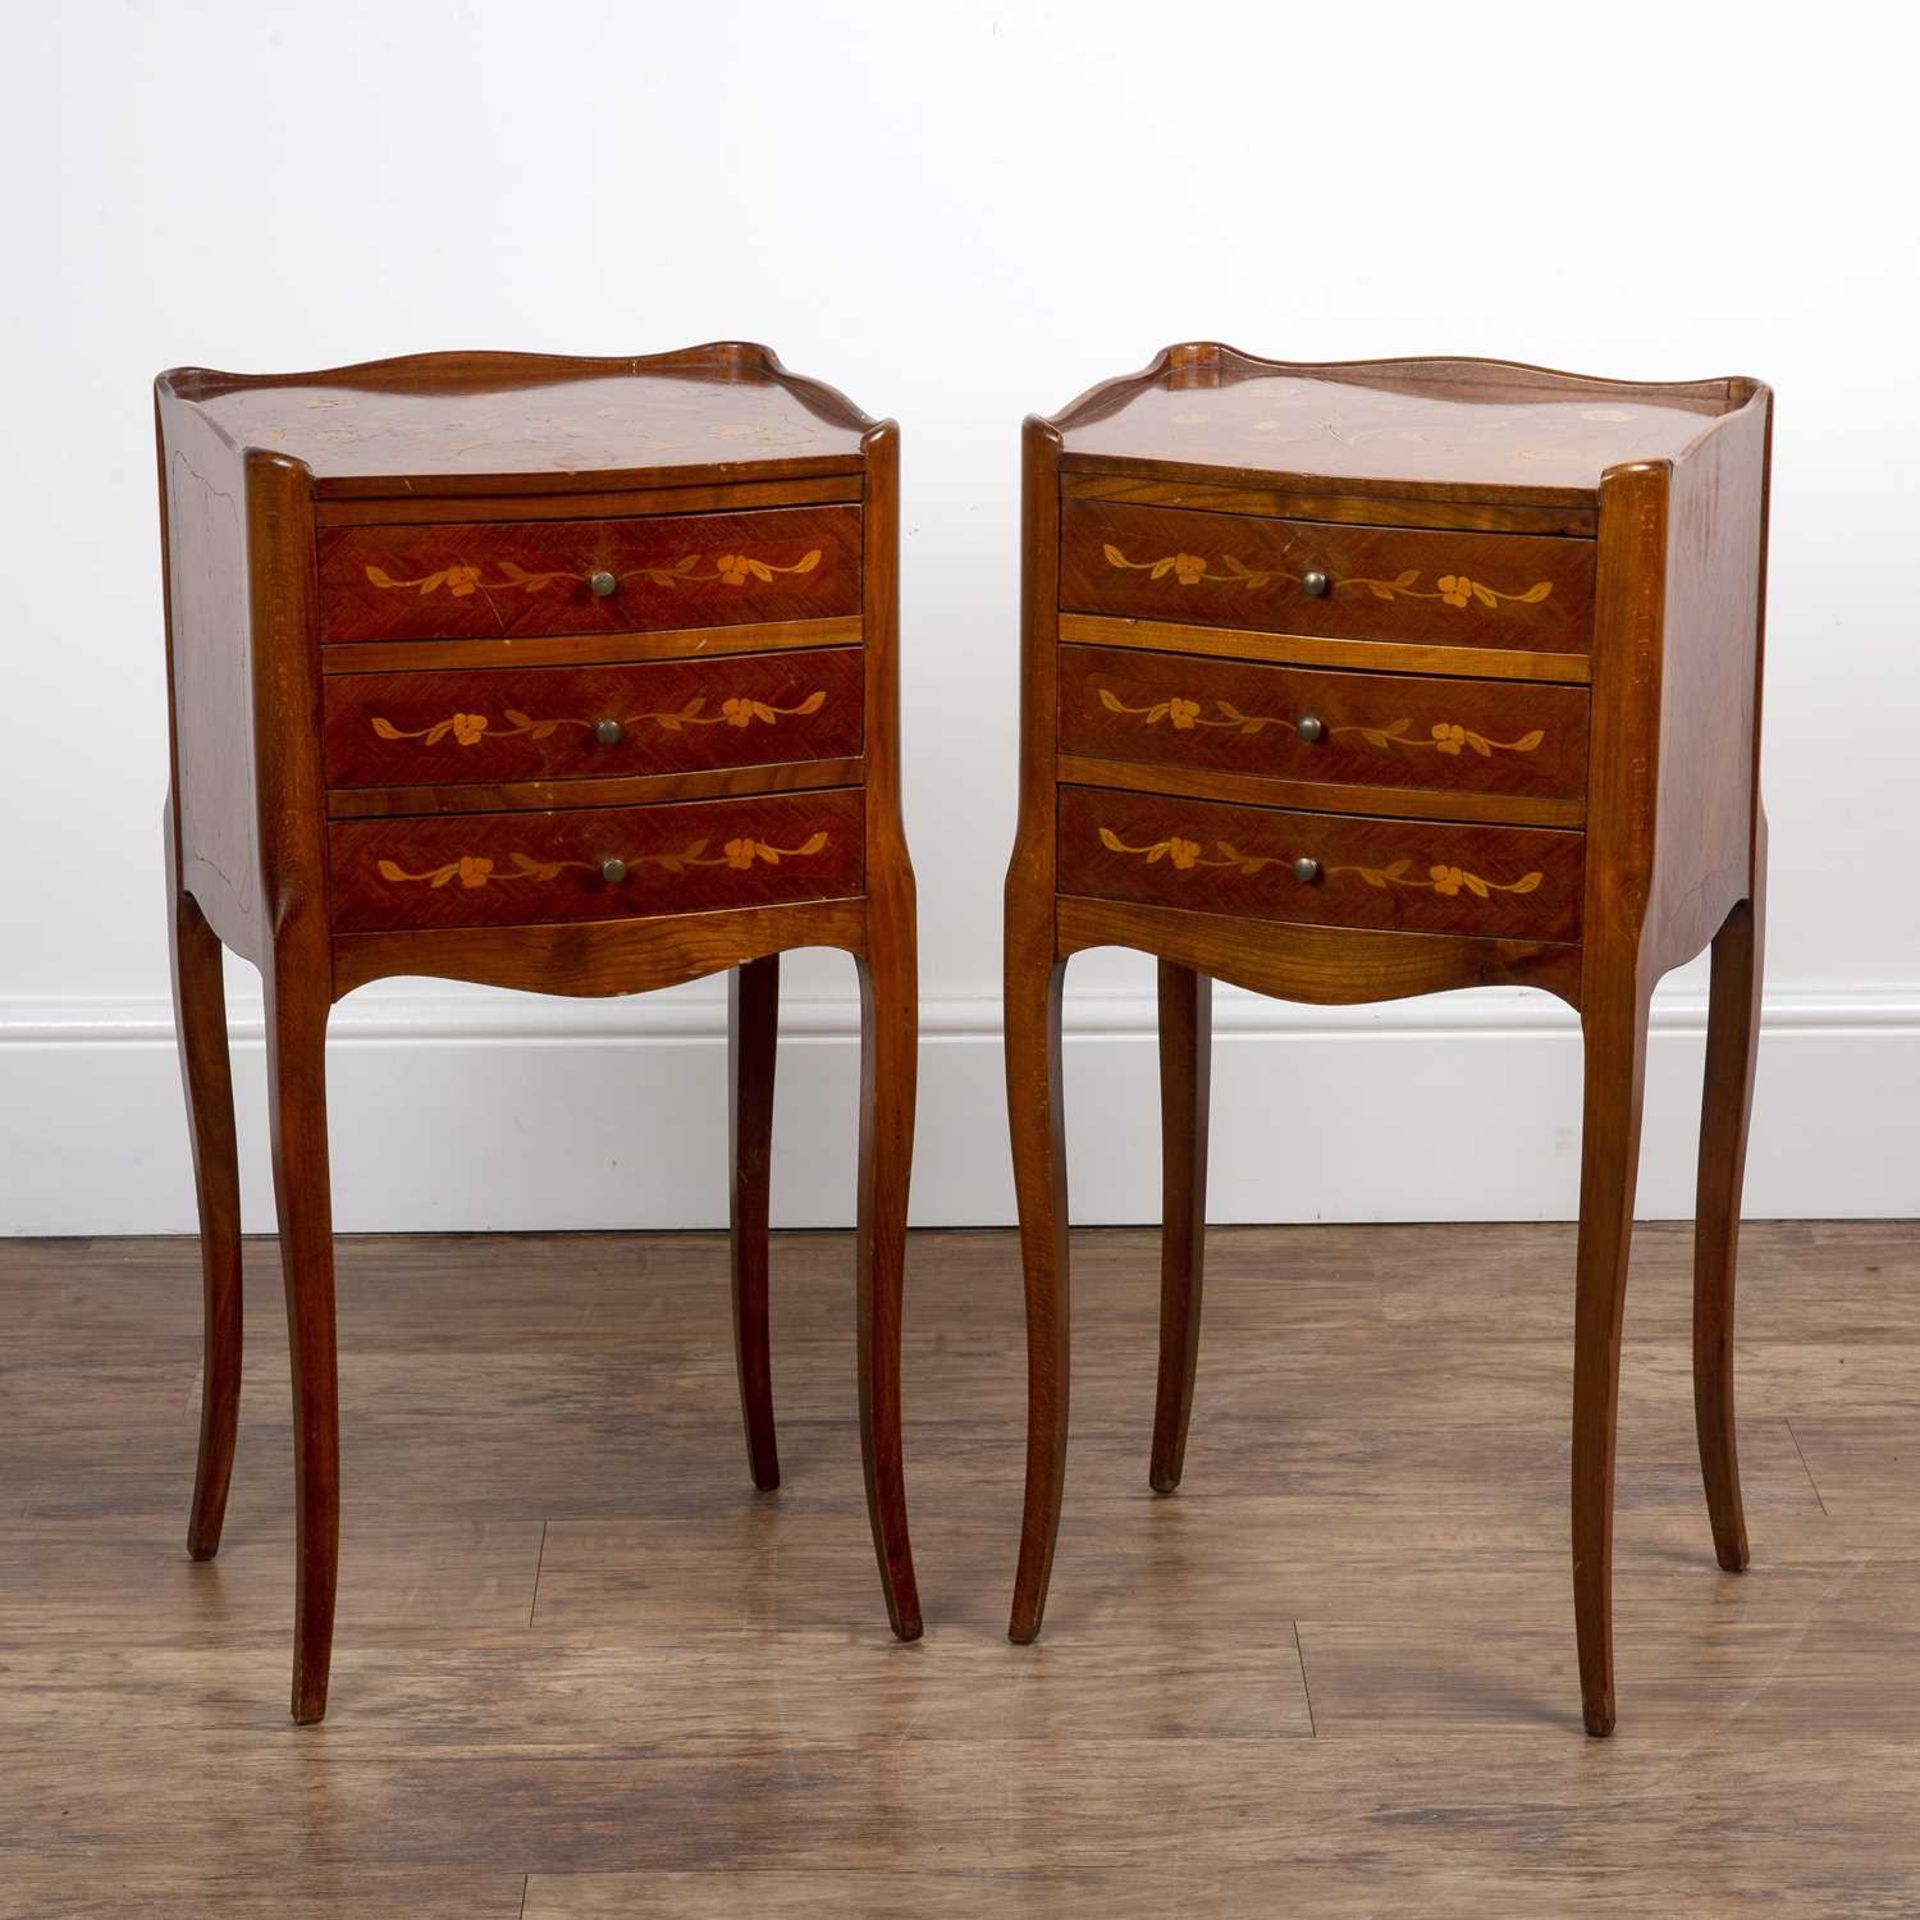 Pair of marquetry bedside table cabinets French style, each fitted with three drawers, 37cm wide x